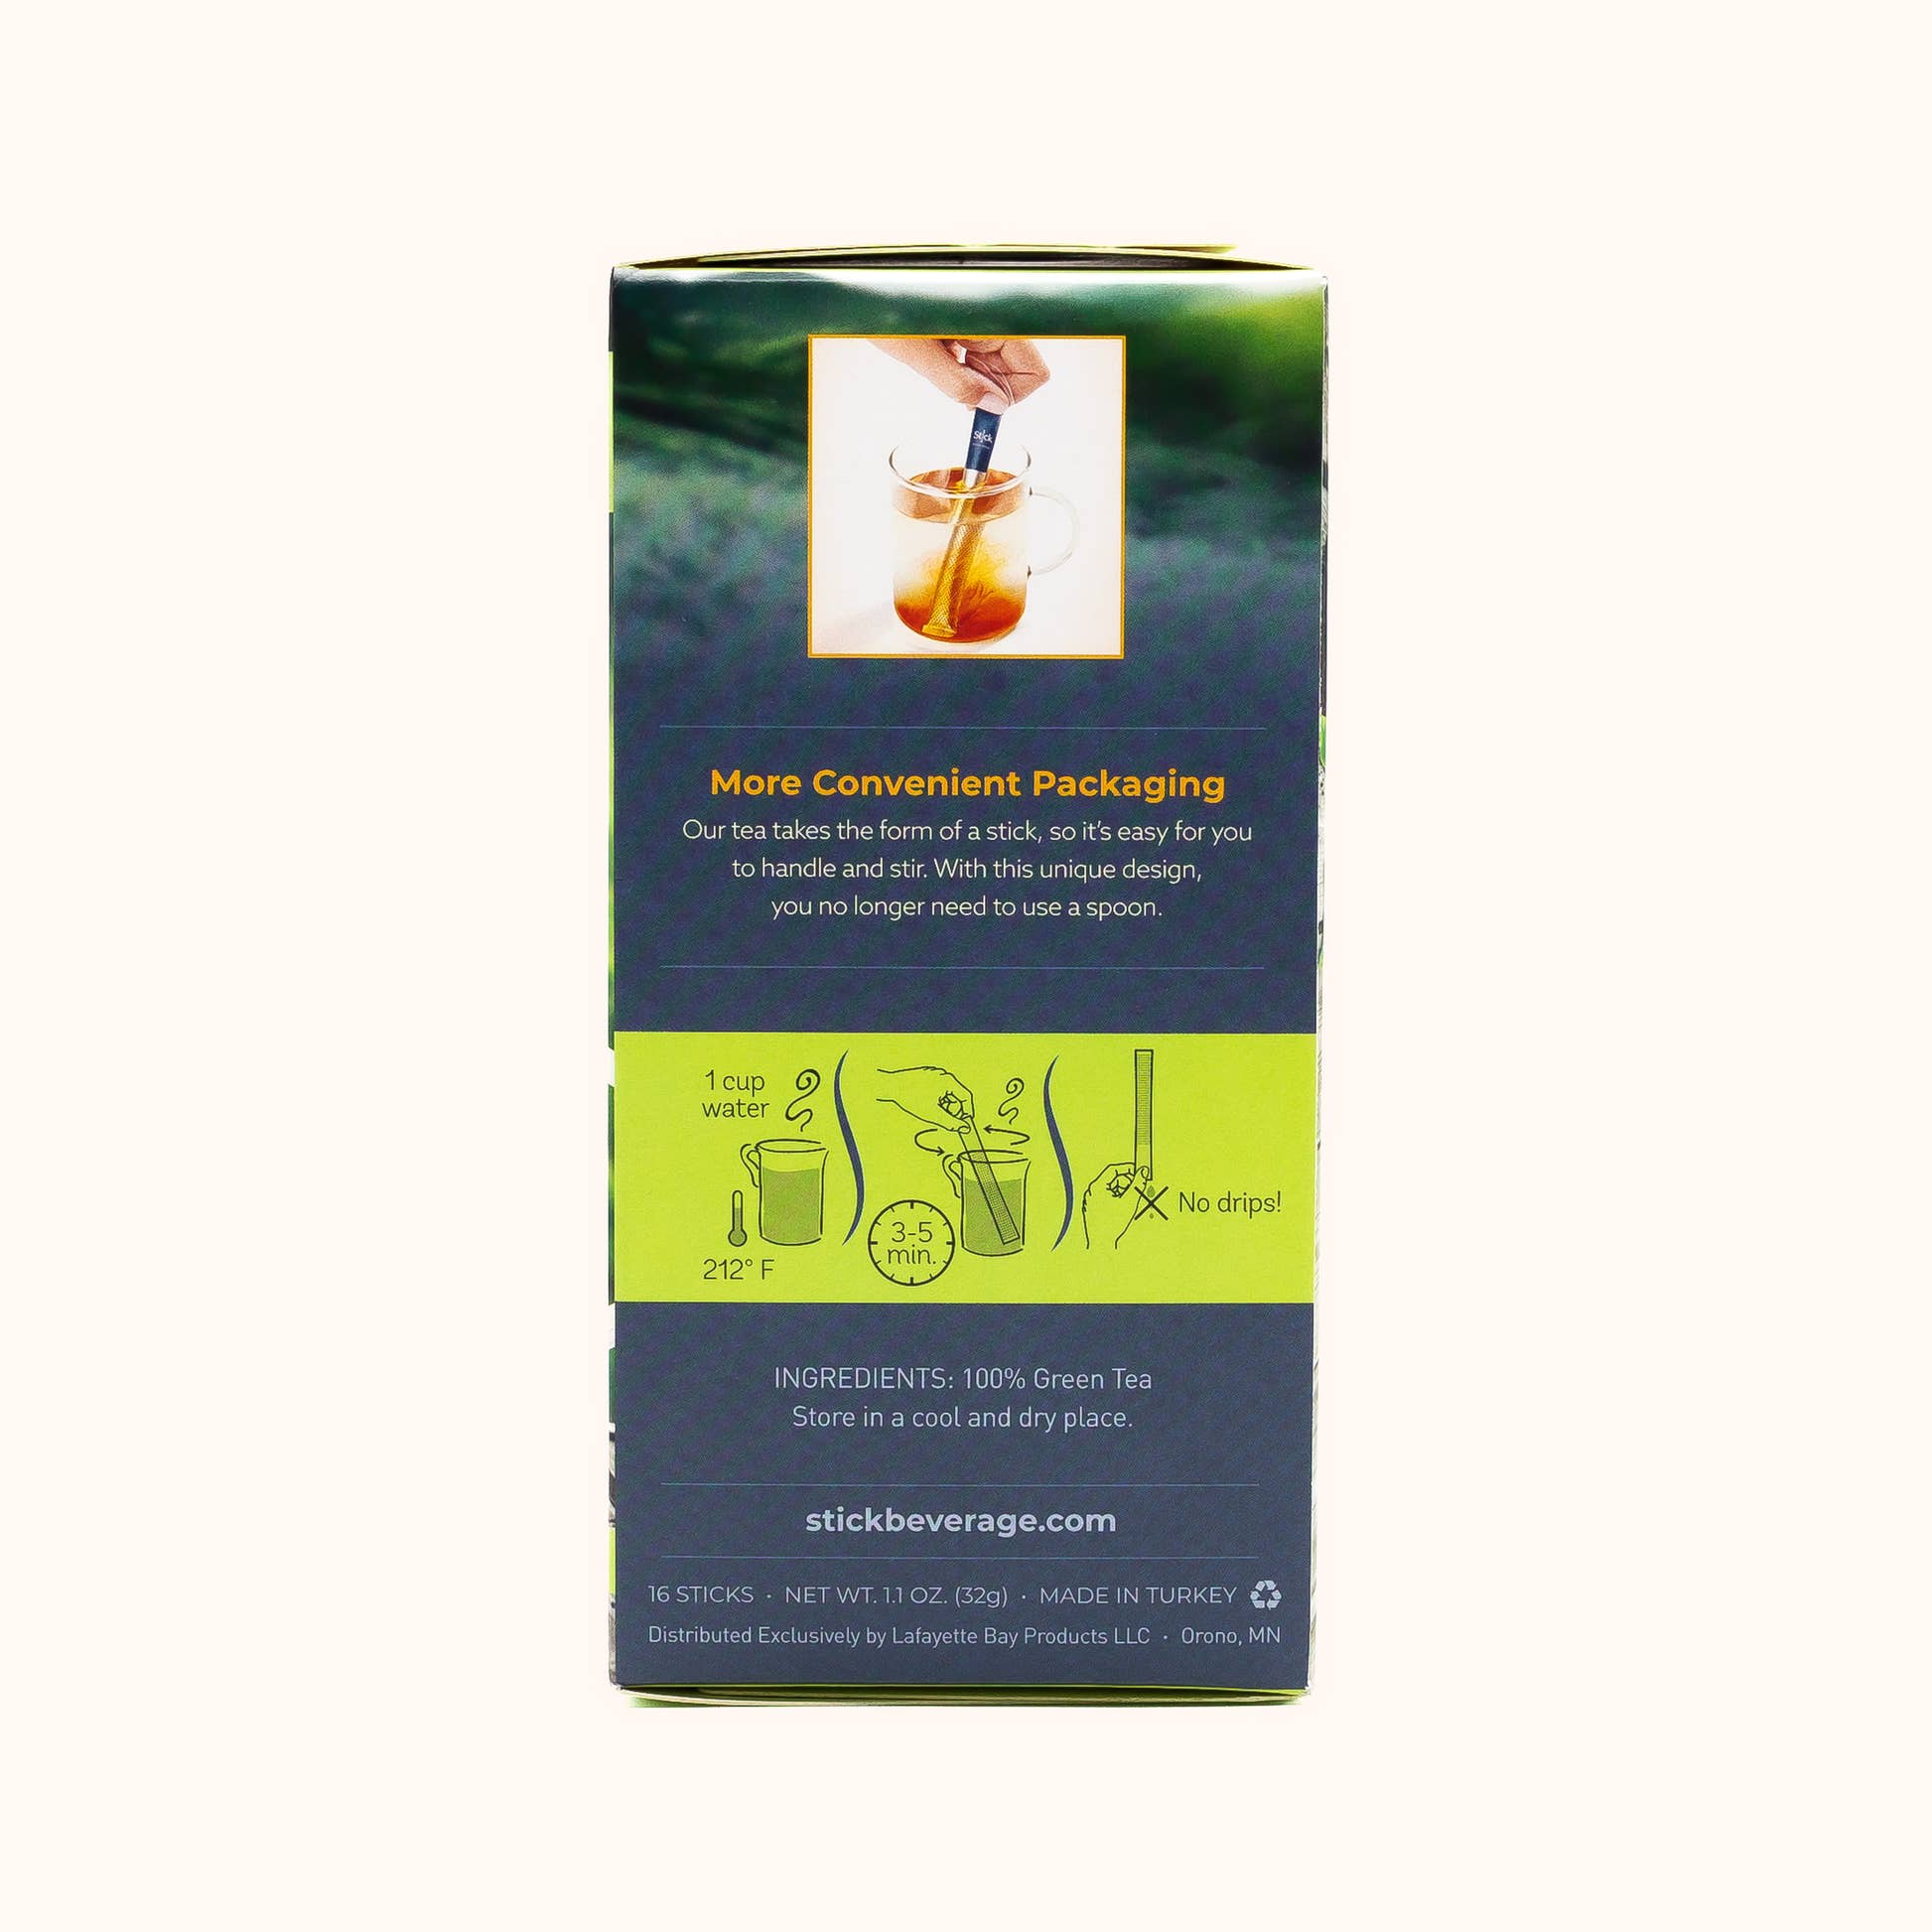 Stick Beverages Green Tea box back with instructions